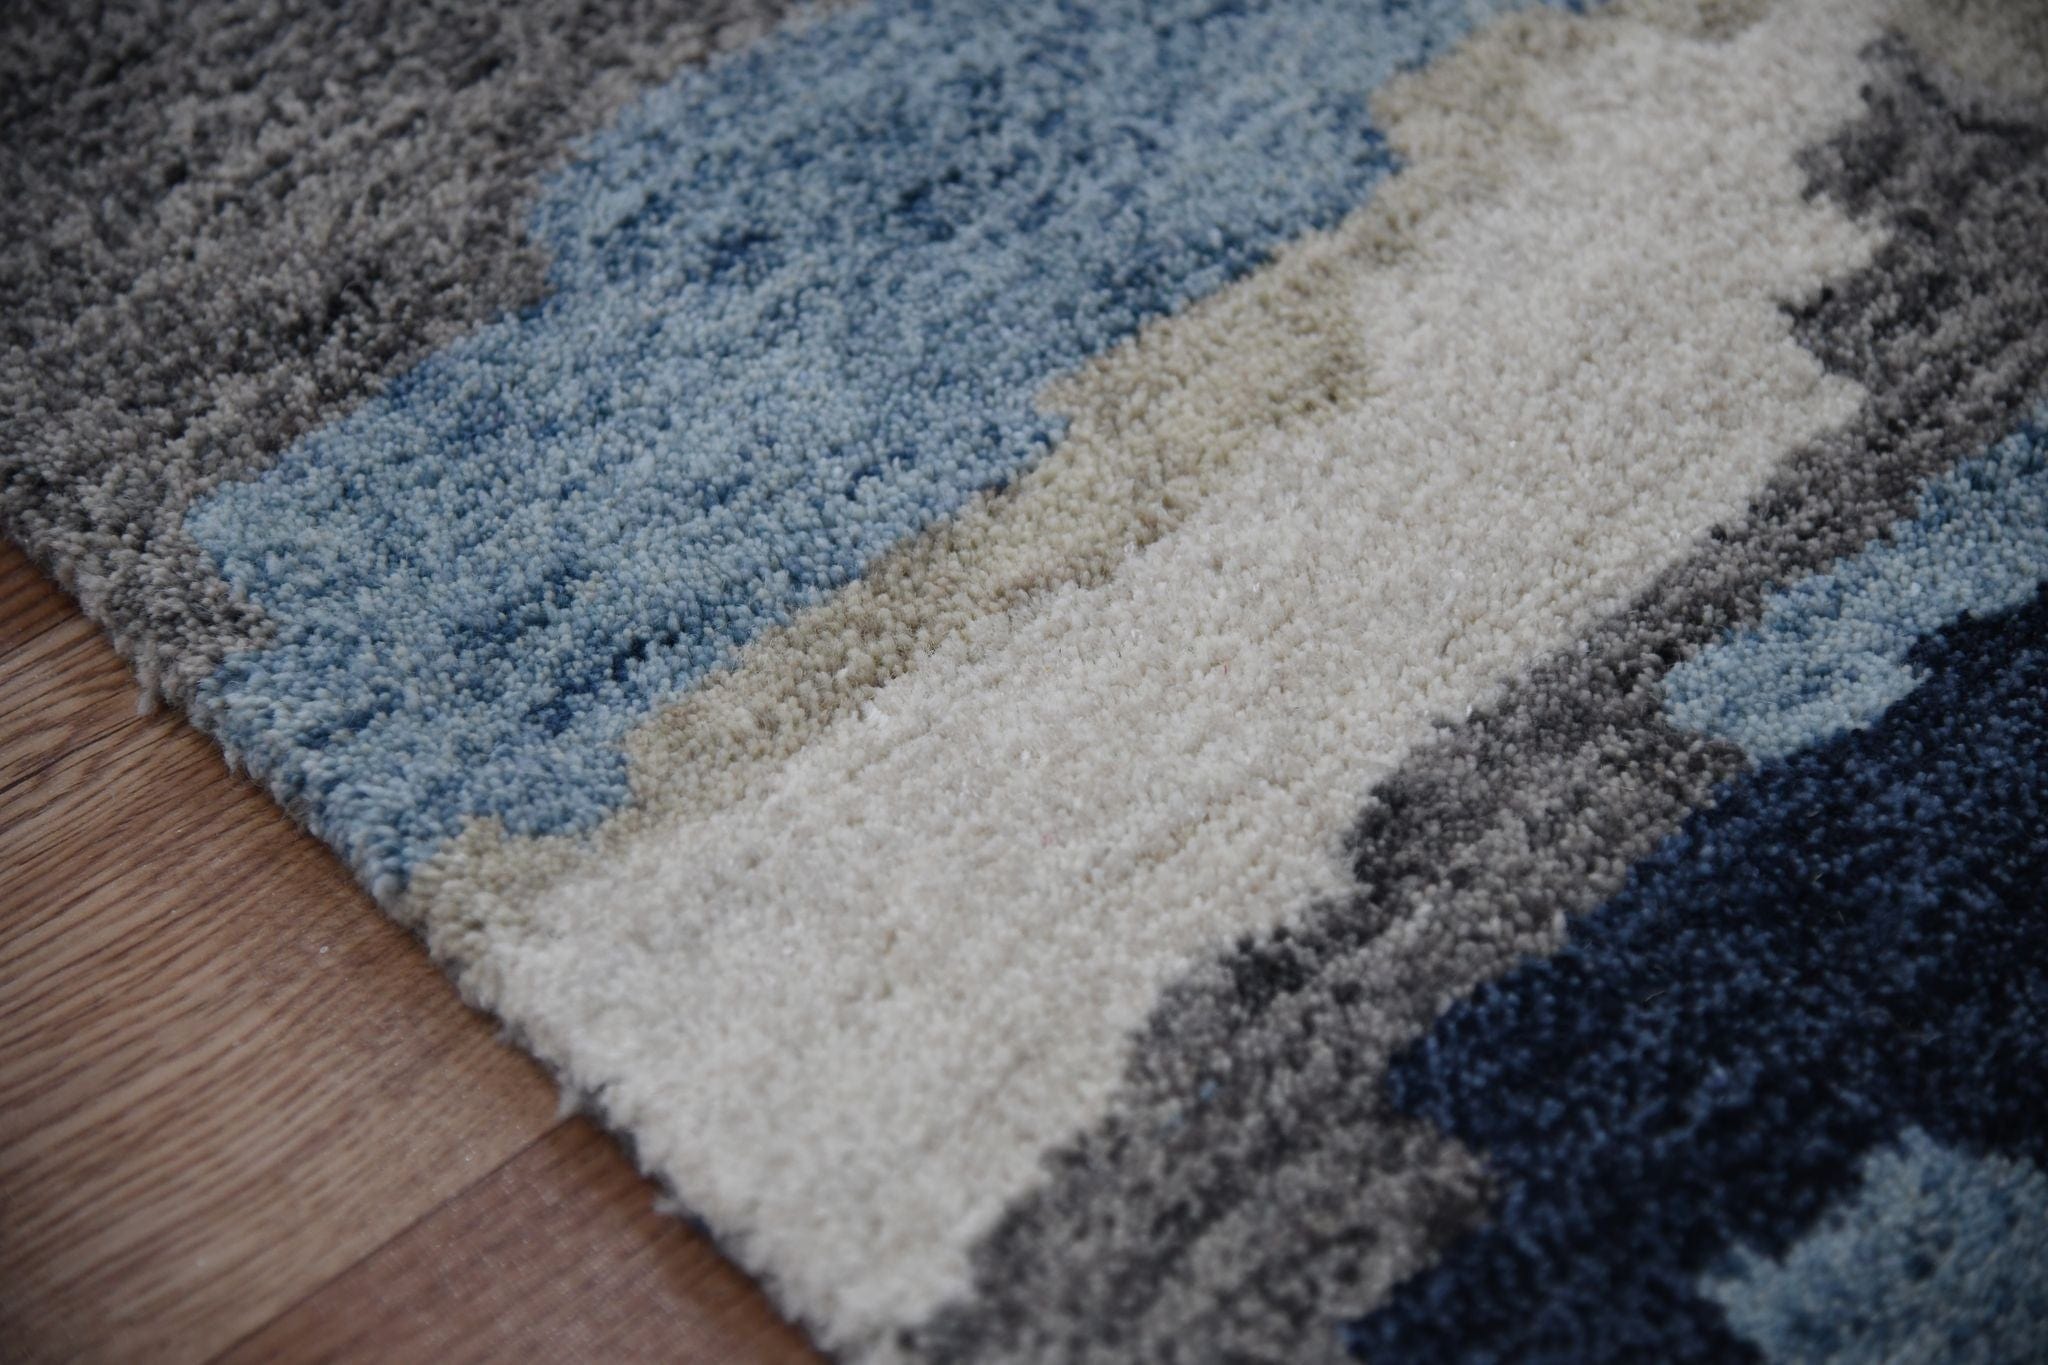 Blue Wool & Viscose Abstract 4x6 Feet  Hand-Tufted Carpet - Rug